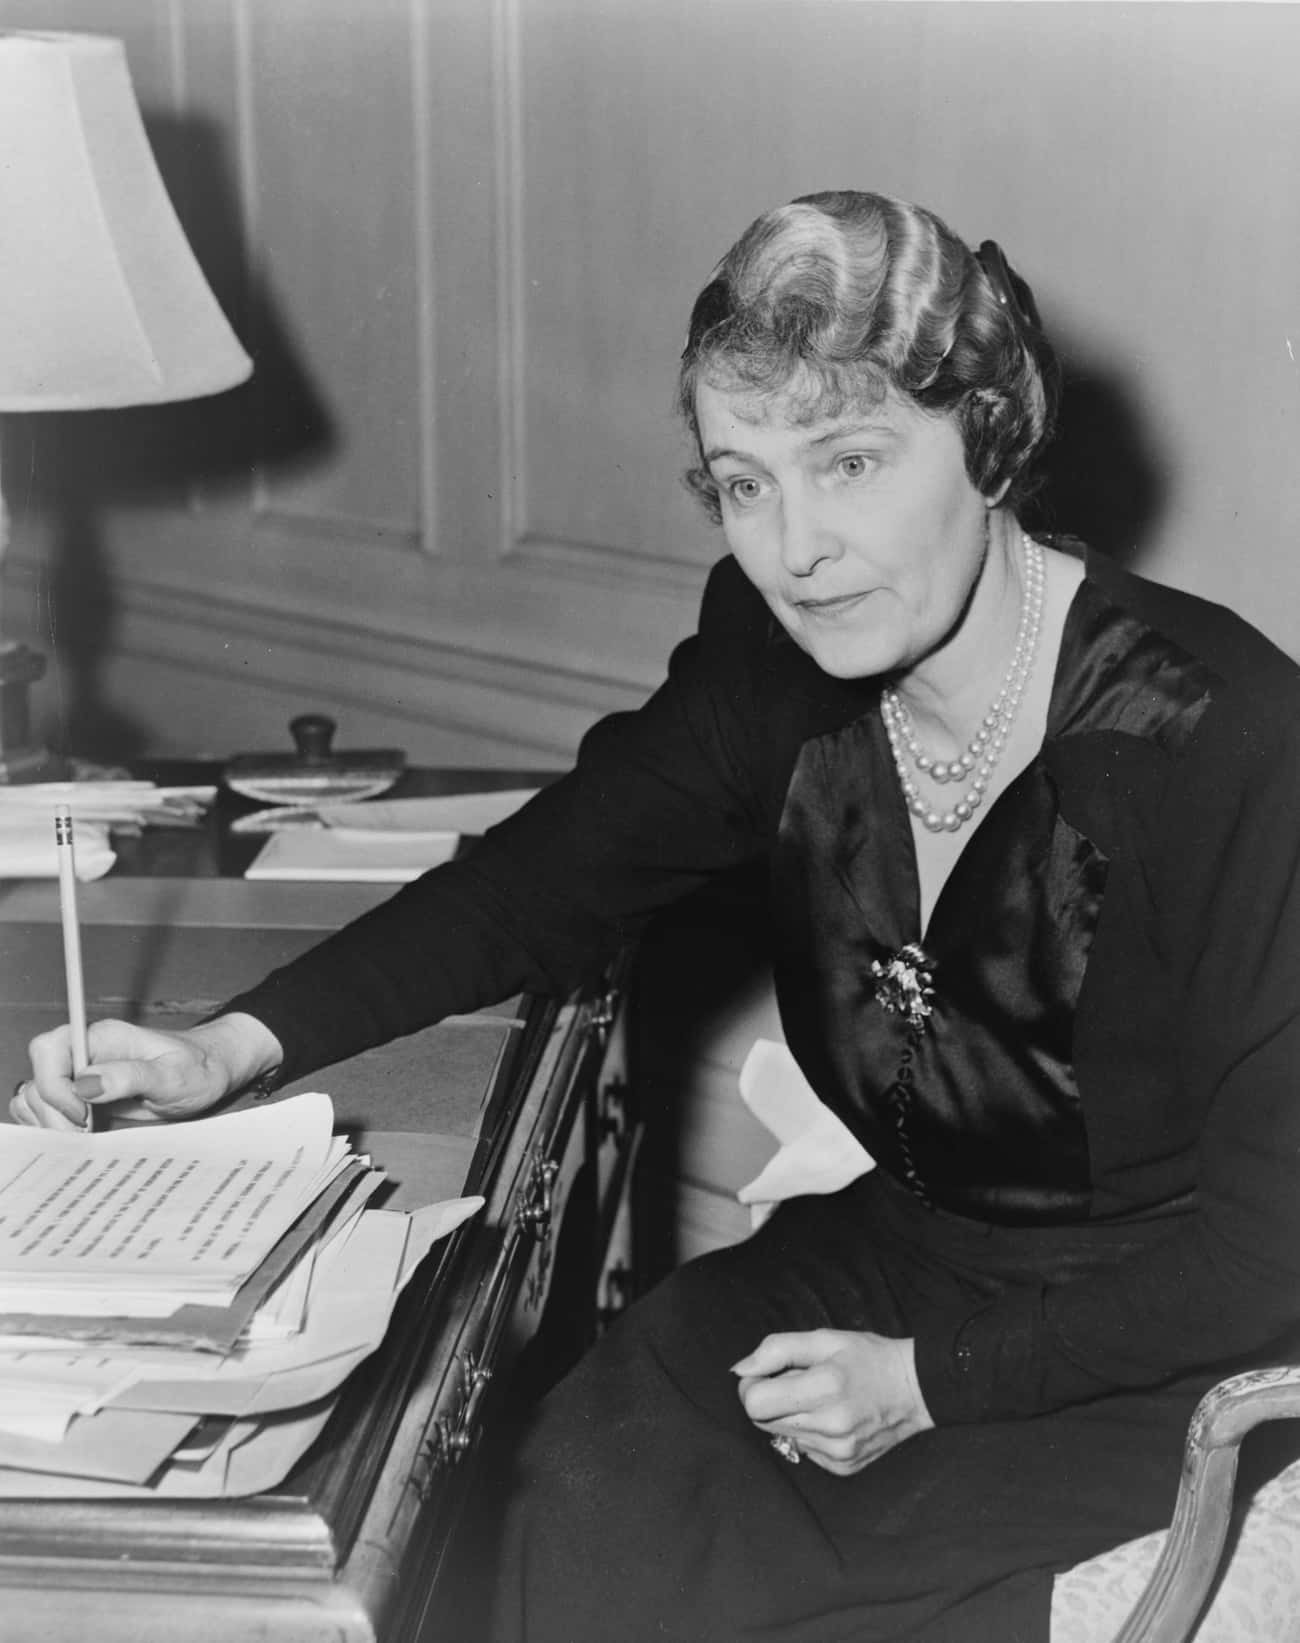 Mar-a-Lago Originally Belonged To Marjorie Merriweather Post, The One-Time Wealthiest Woman In The United States